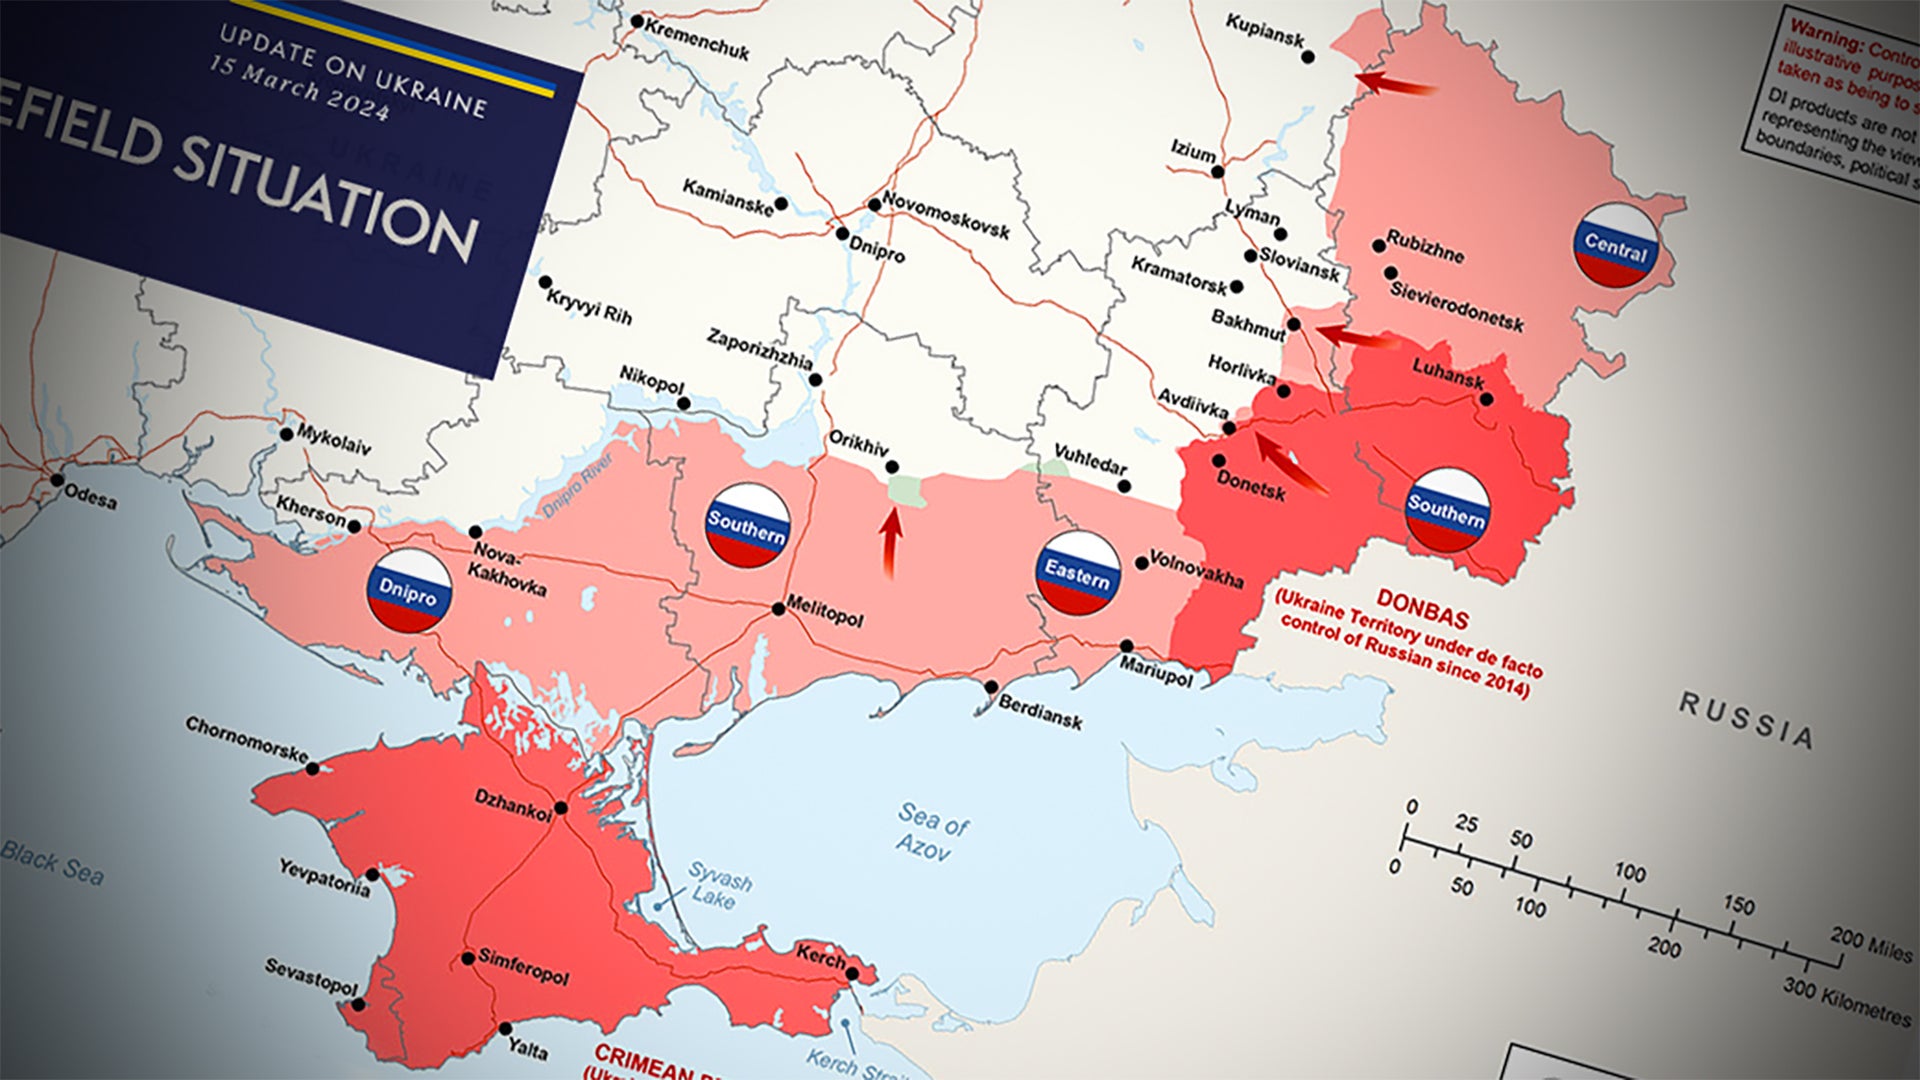 Ukraine Situation Report: Putin Now Talking About Creating A “Buffer Zone”